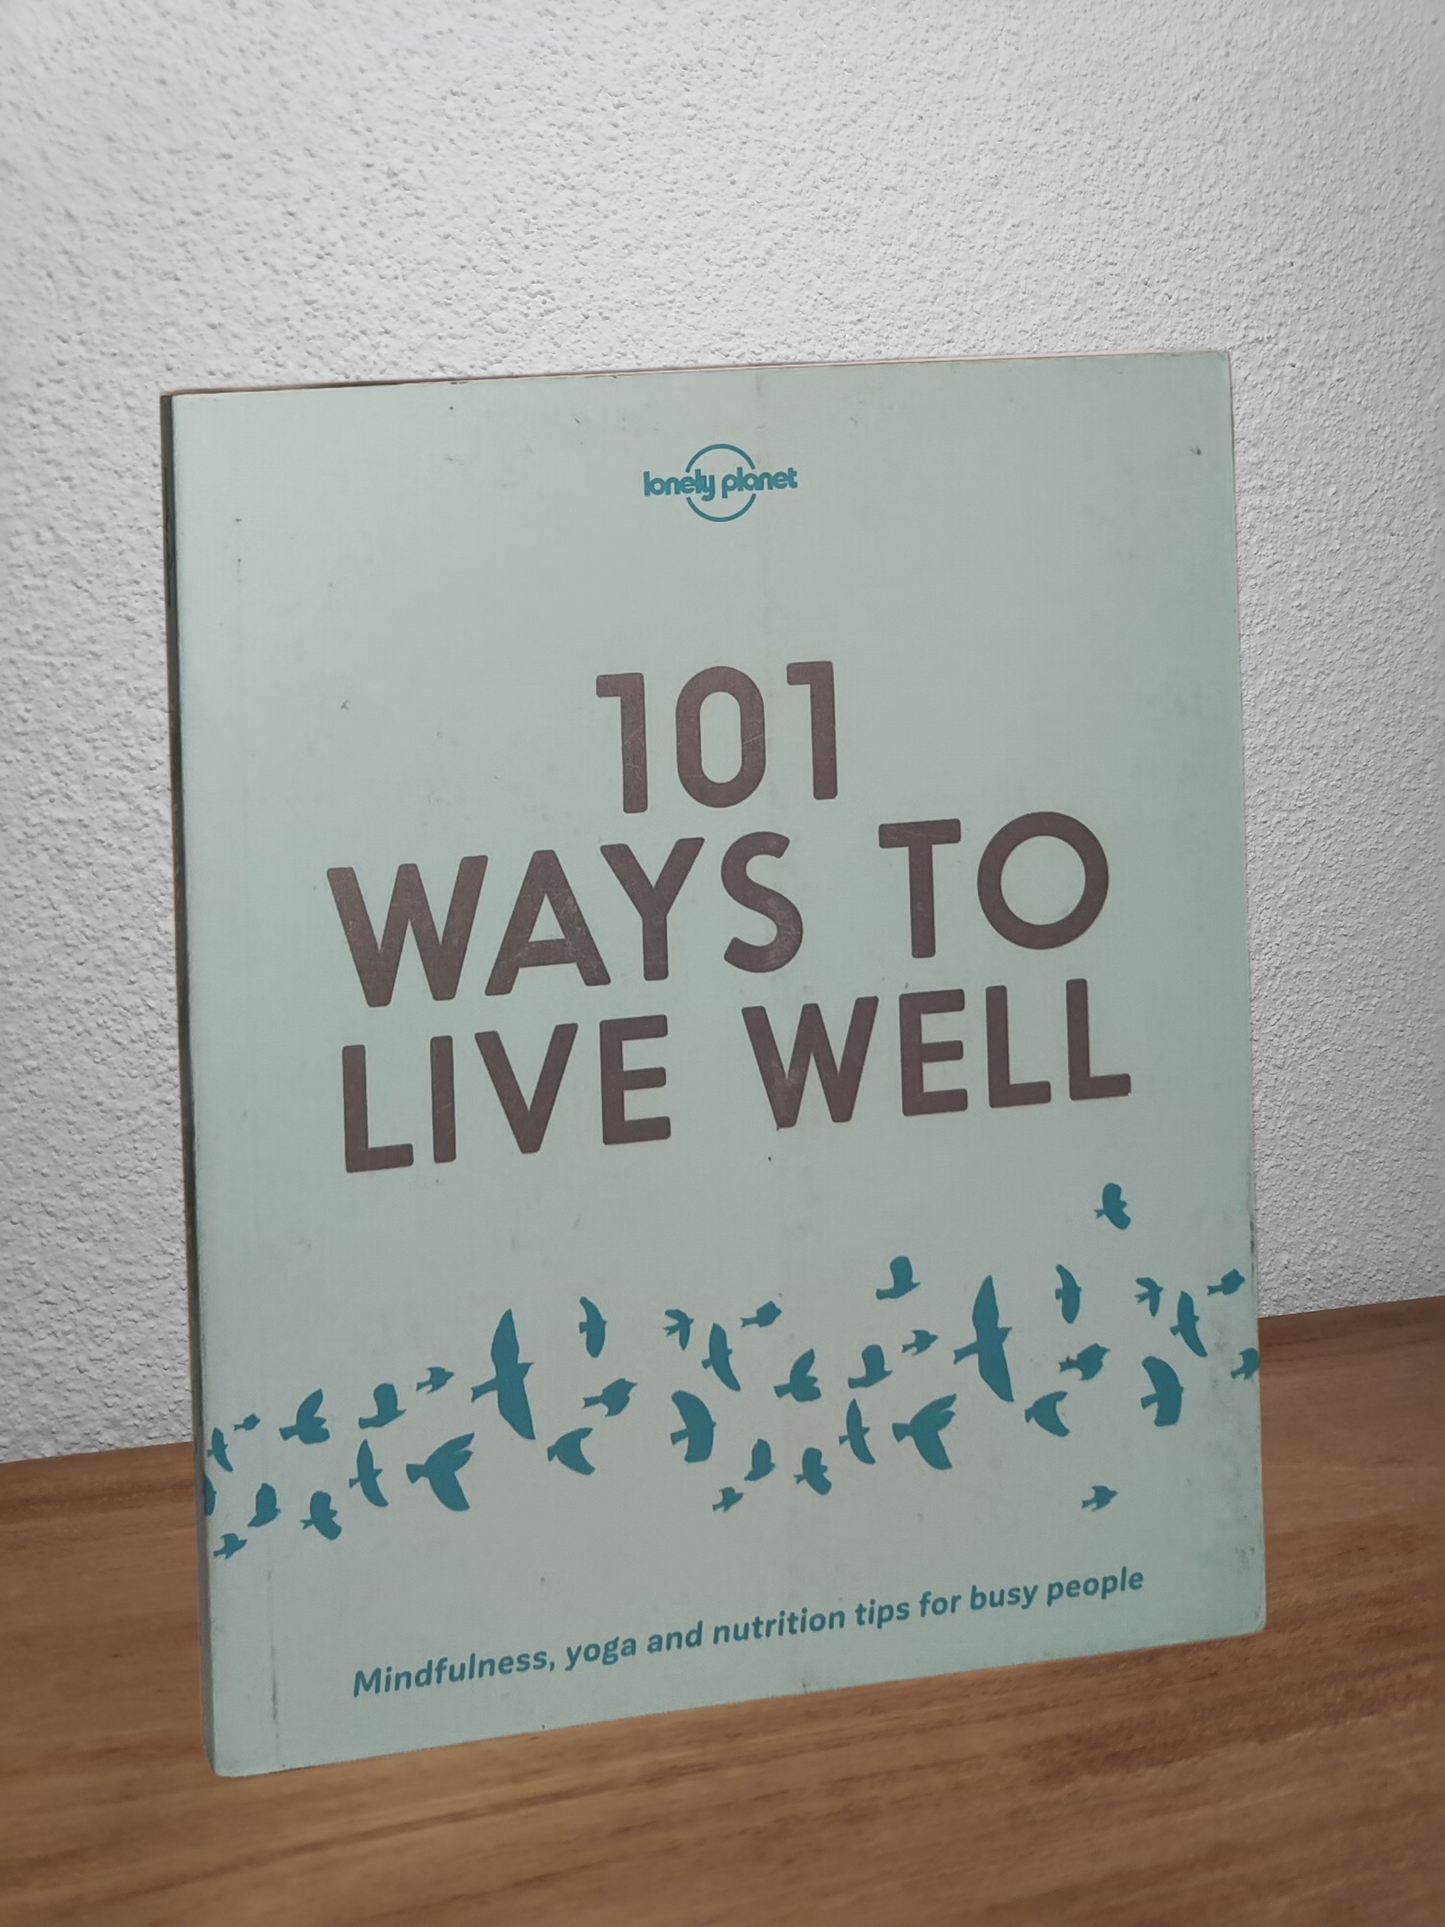 Lonely Planet - 101 Ways to Live Well  - Second-hand english book to deliver in Zurich & Switzerland